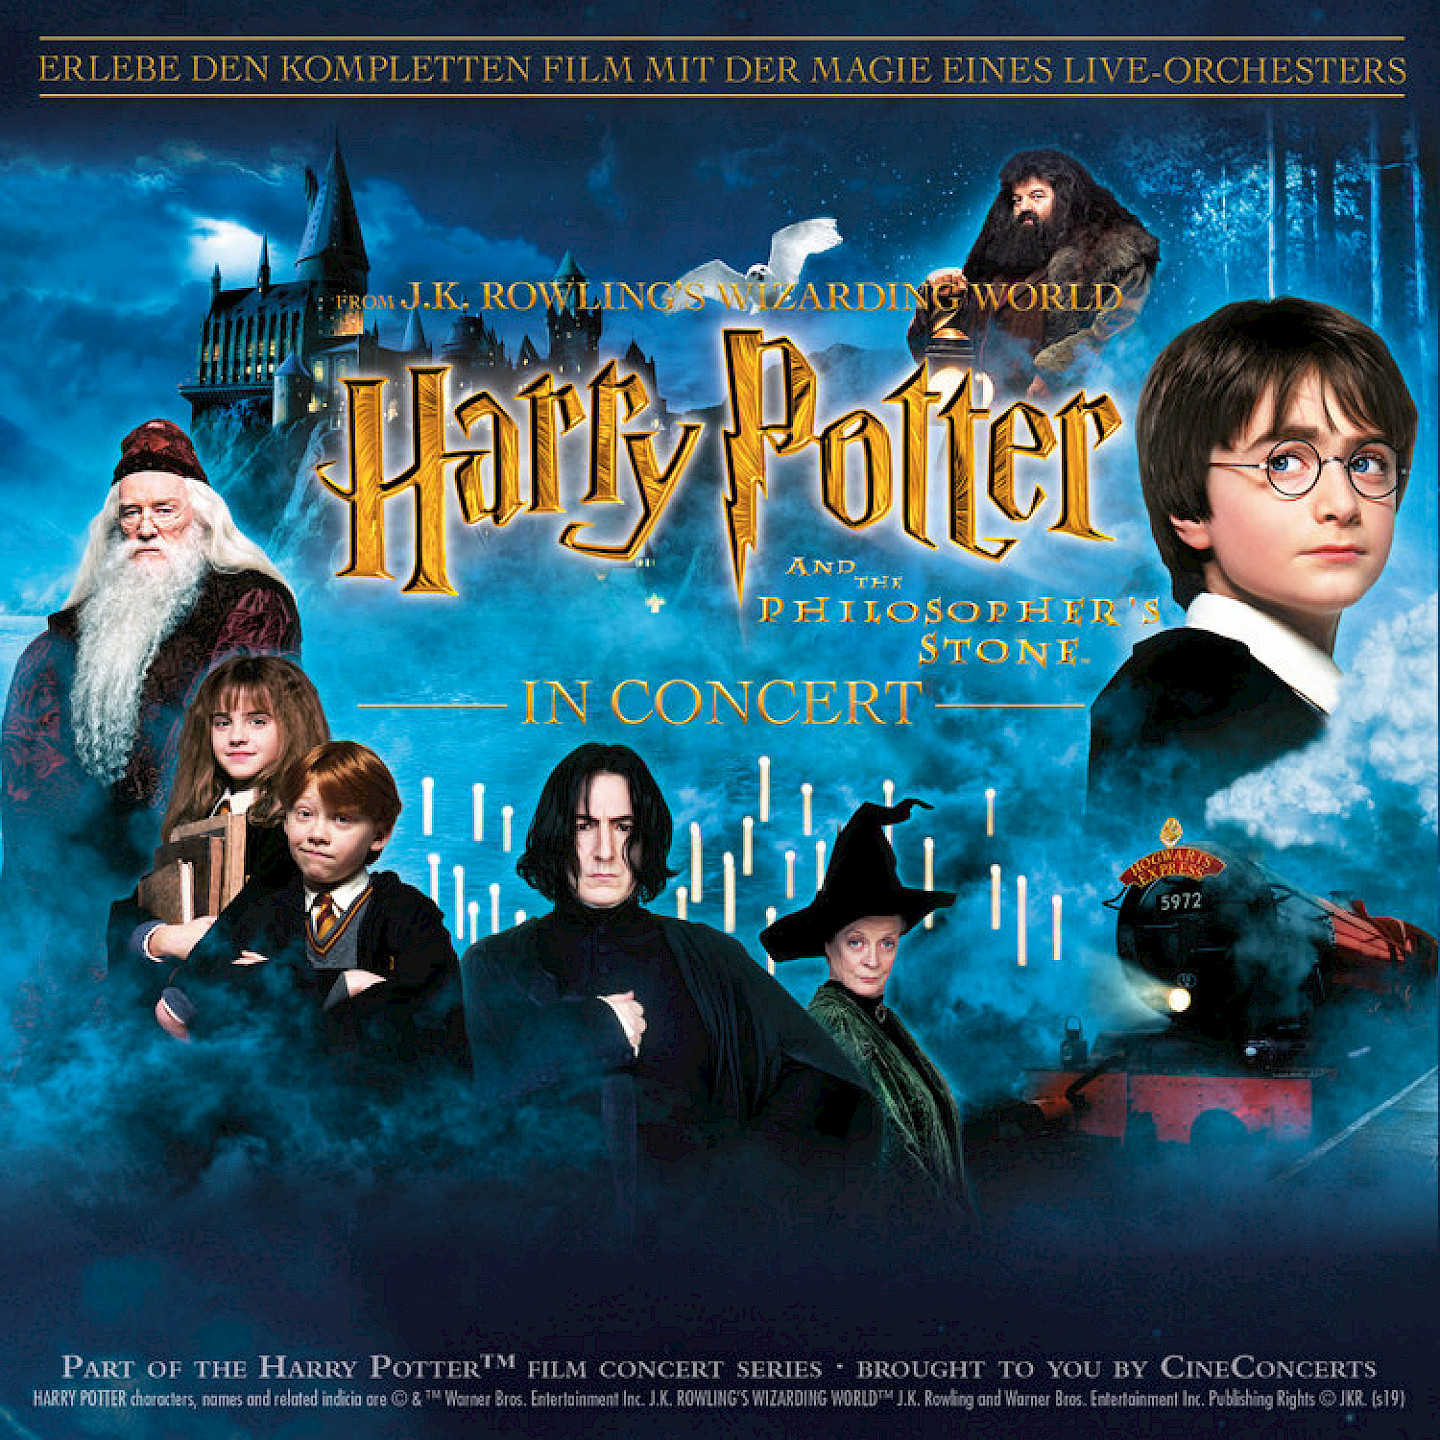 Harry Potter and The Philosopher’s Stone - in Concert